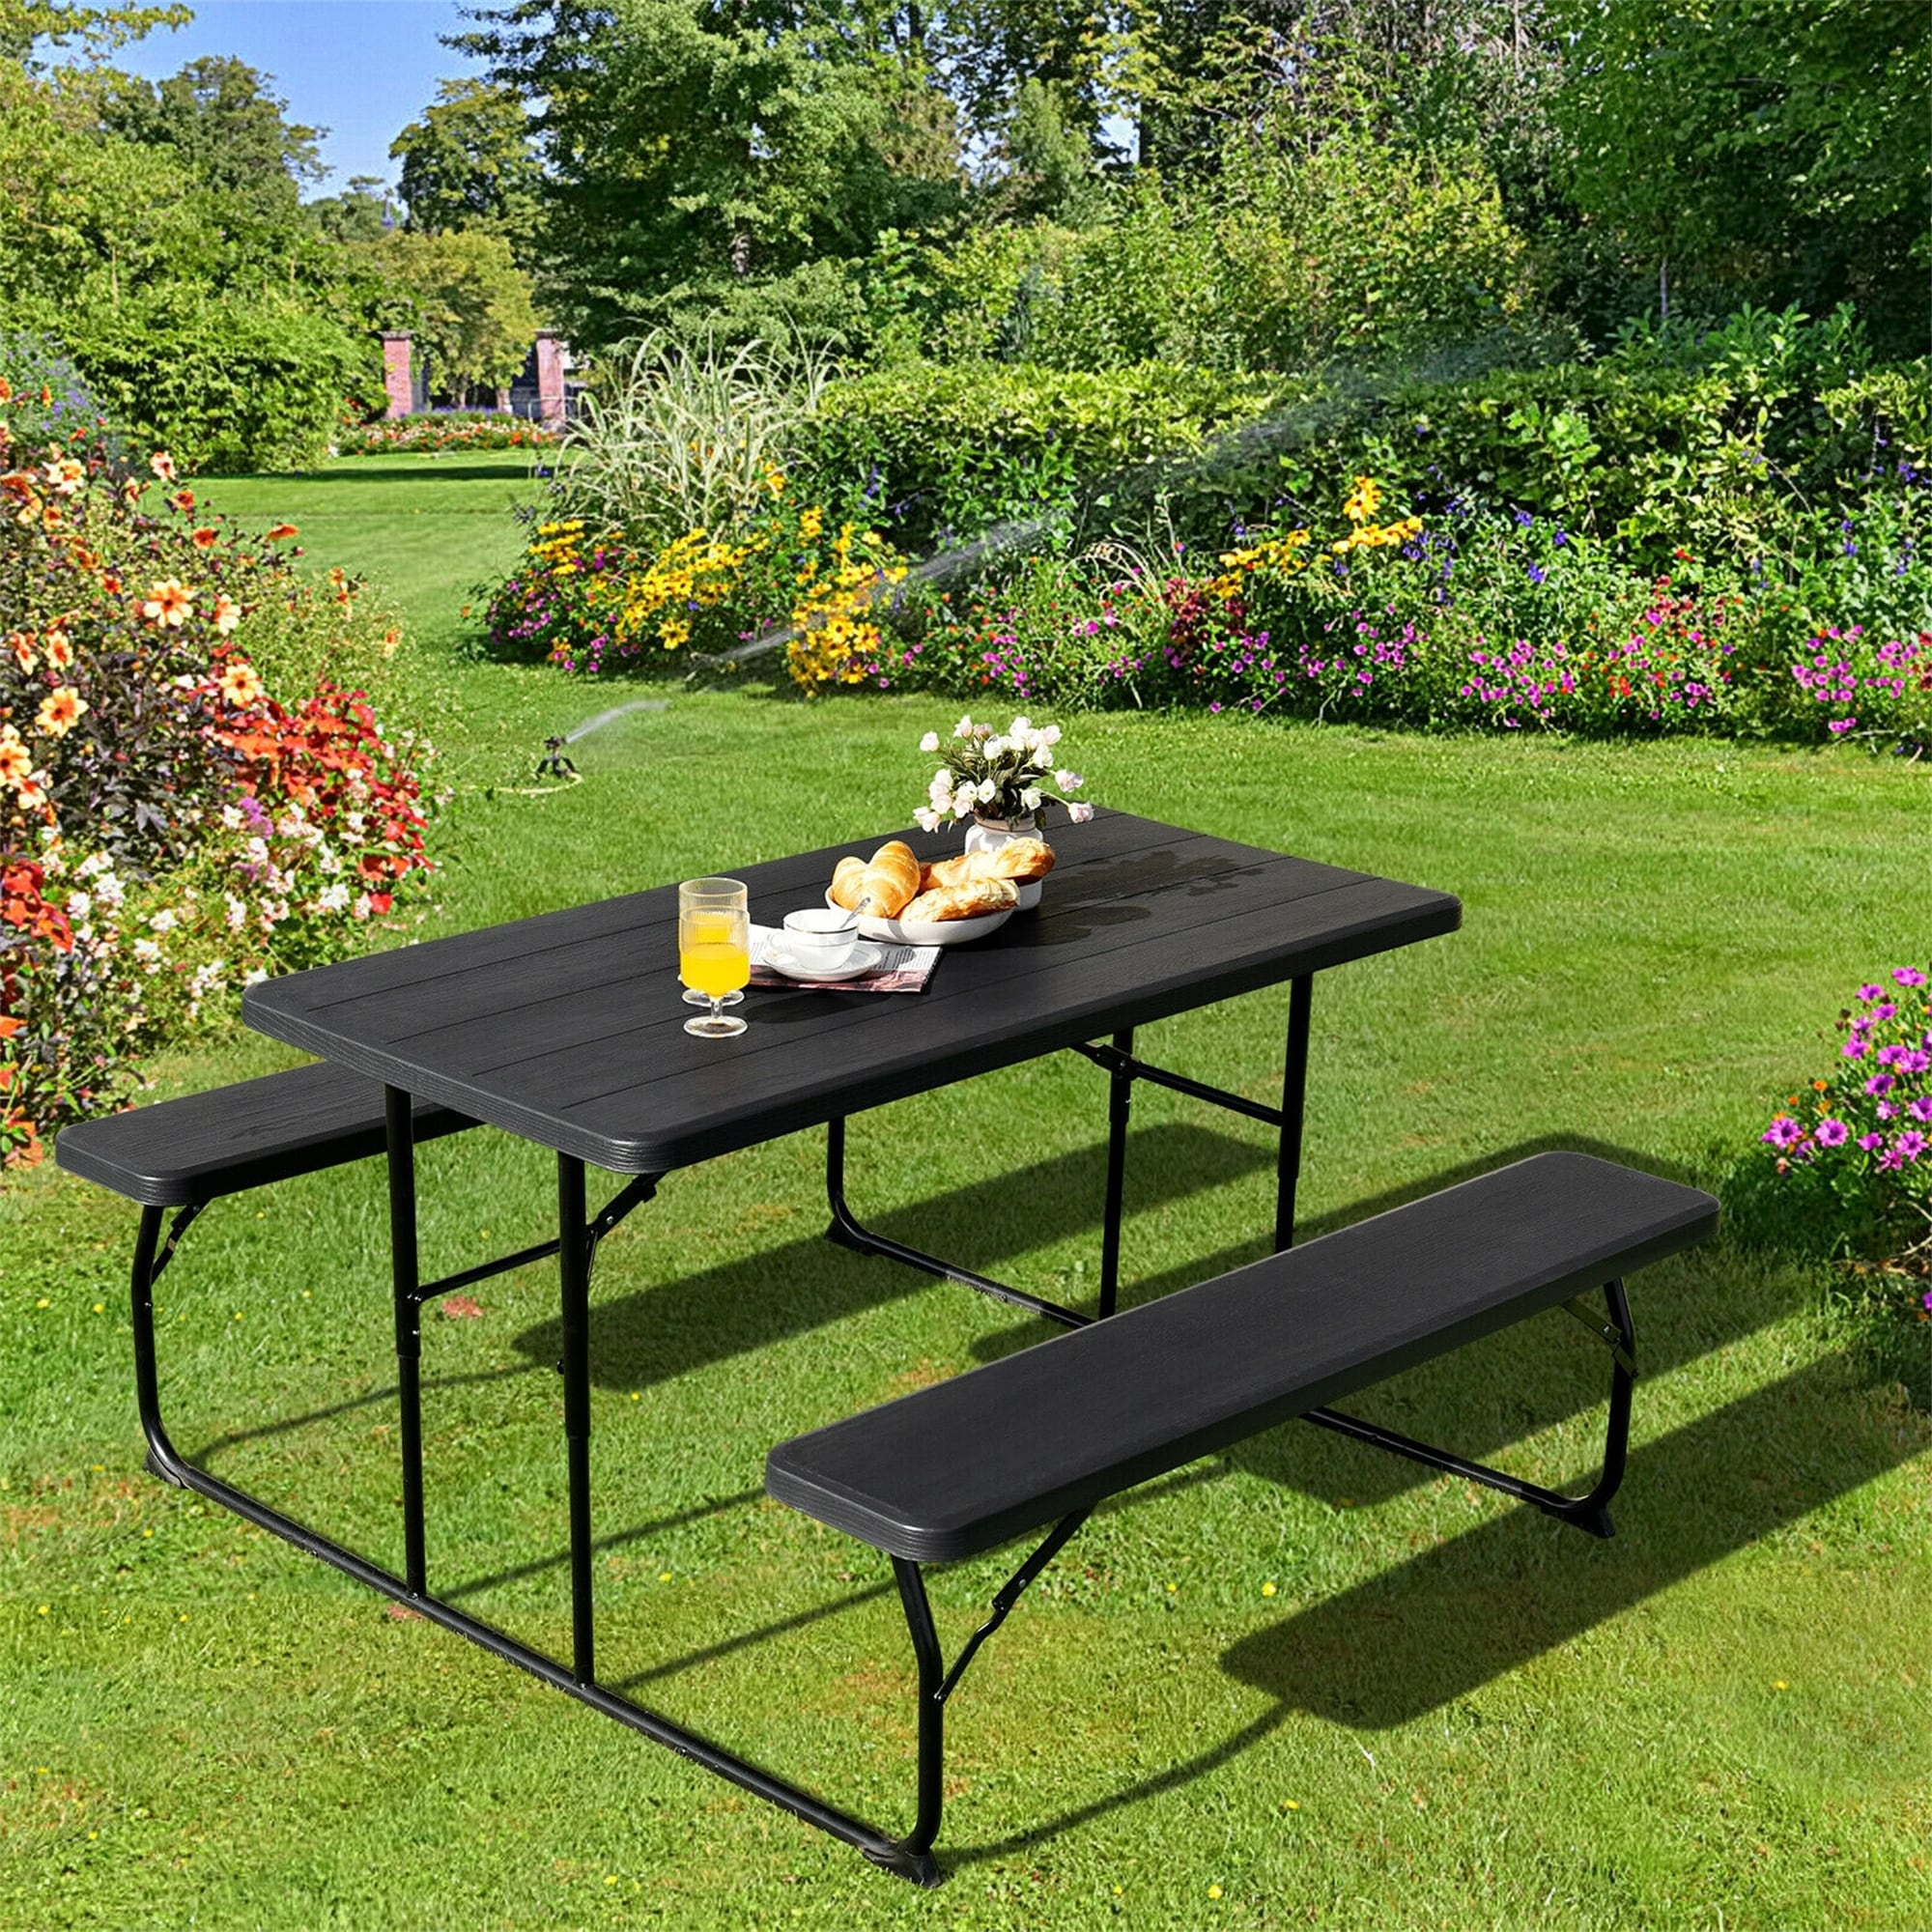 Indoor and Outdoor Folding Picnic Table Bench Set With Wood-like Texture